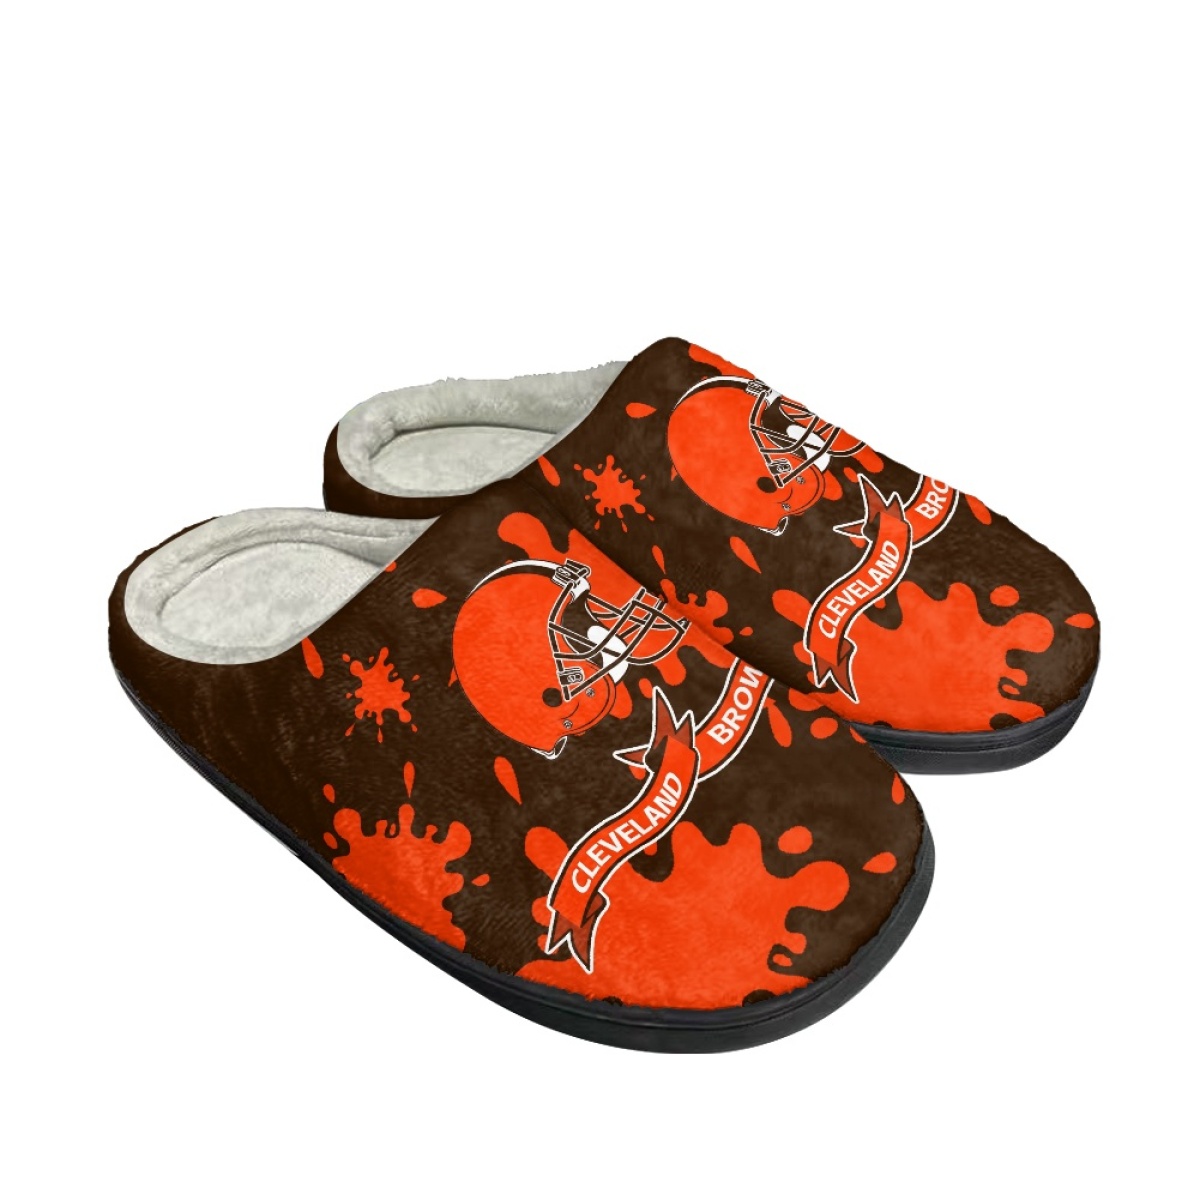 Men's Cleveland Browns Slippers/Shoes 005